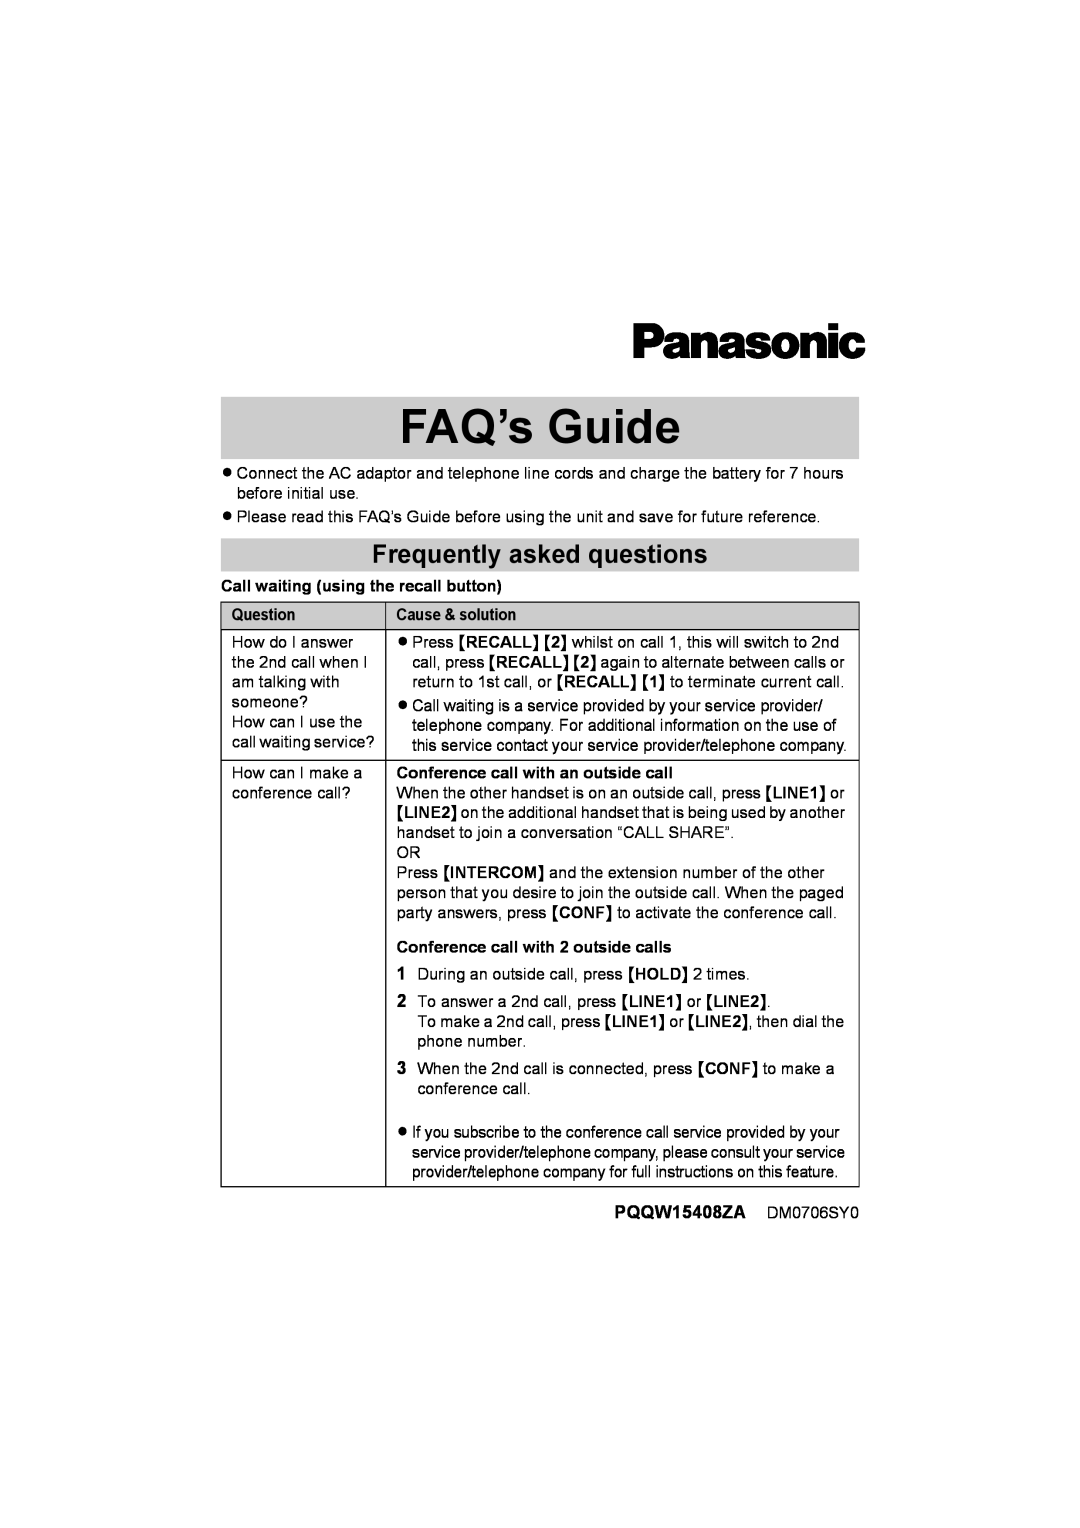 Panasonic PQQW15408ZA, DM0706SY0 manual Call waiting using the recall button, Question, Cause & solution, FAQ’s Guide 